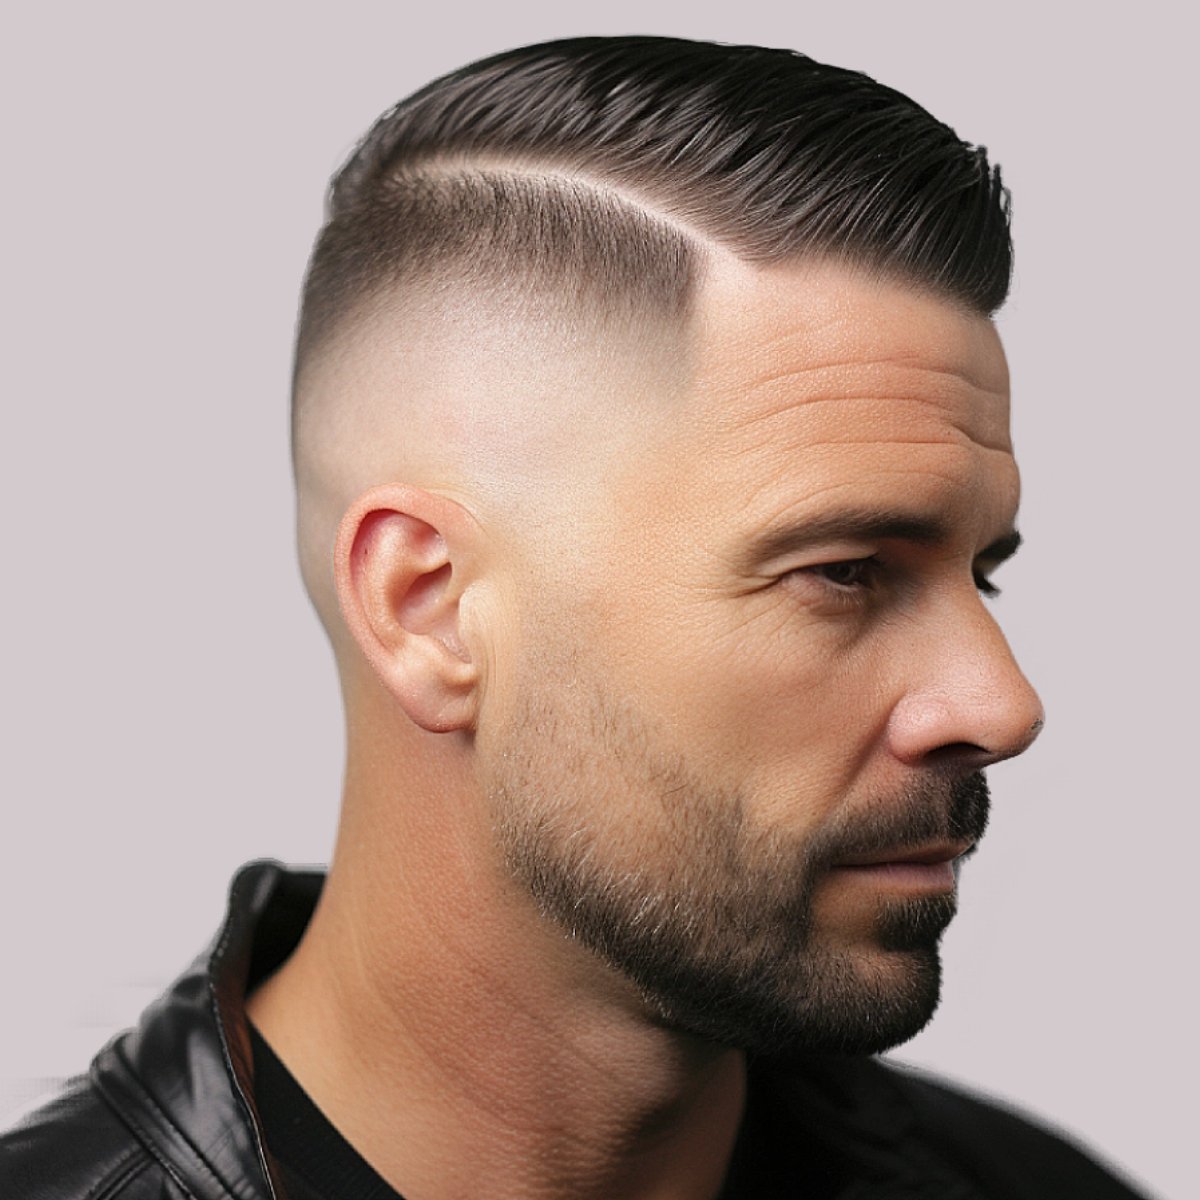 100+ Layered Haircuts For Men with Straight or Wavy Hair | Haircuts for men,  Layered haircuts, Hair cuts